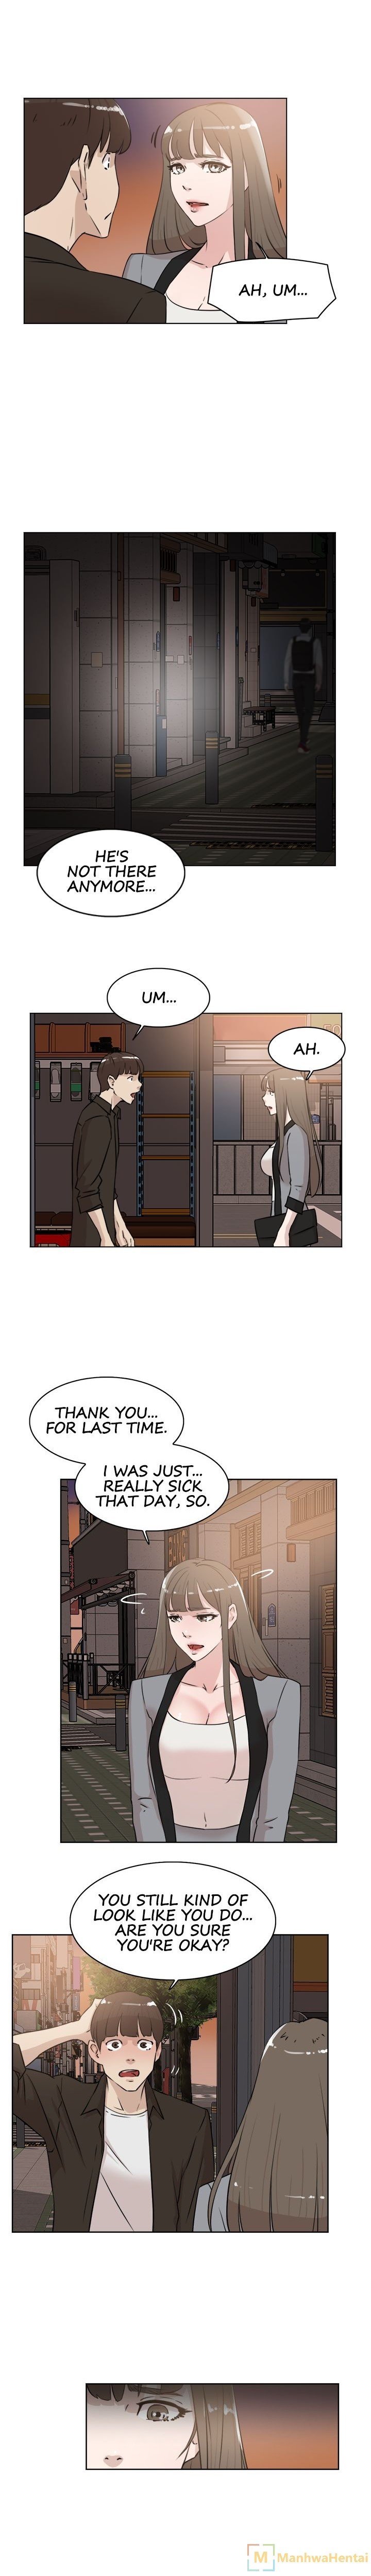 office-affairs-chap-21-9